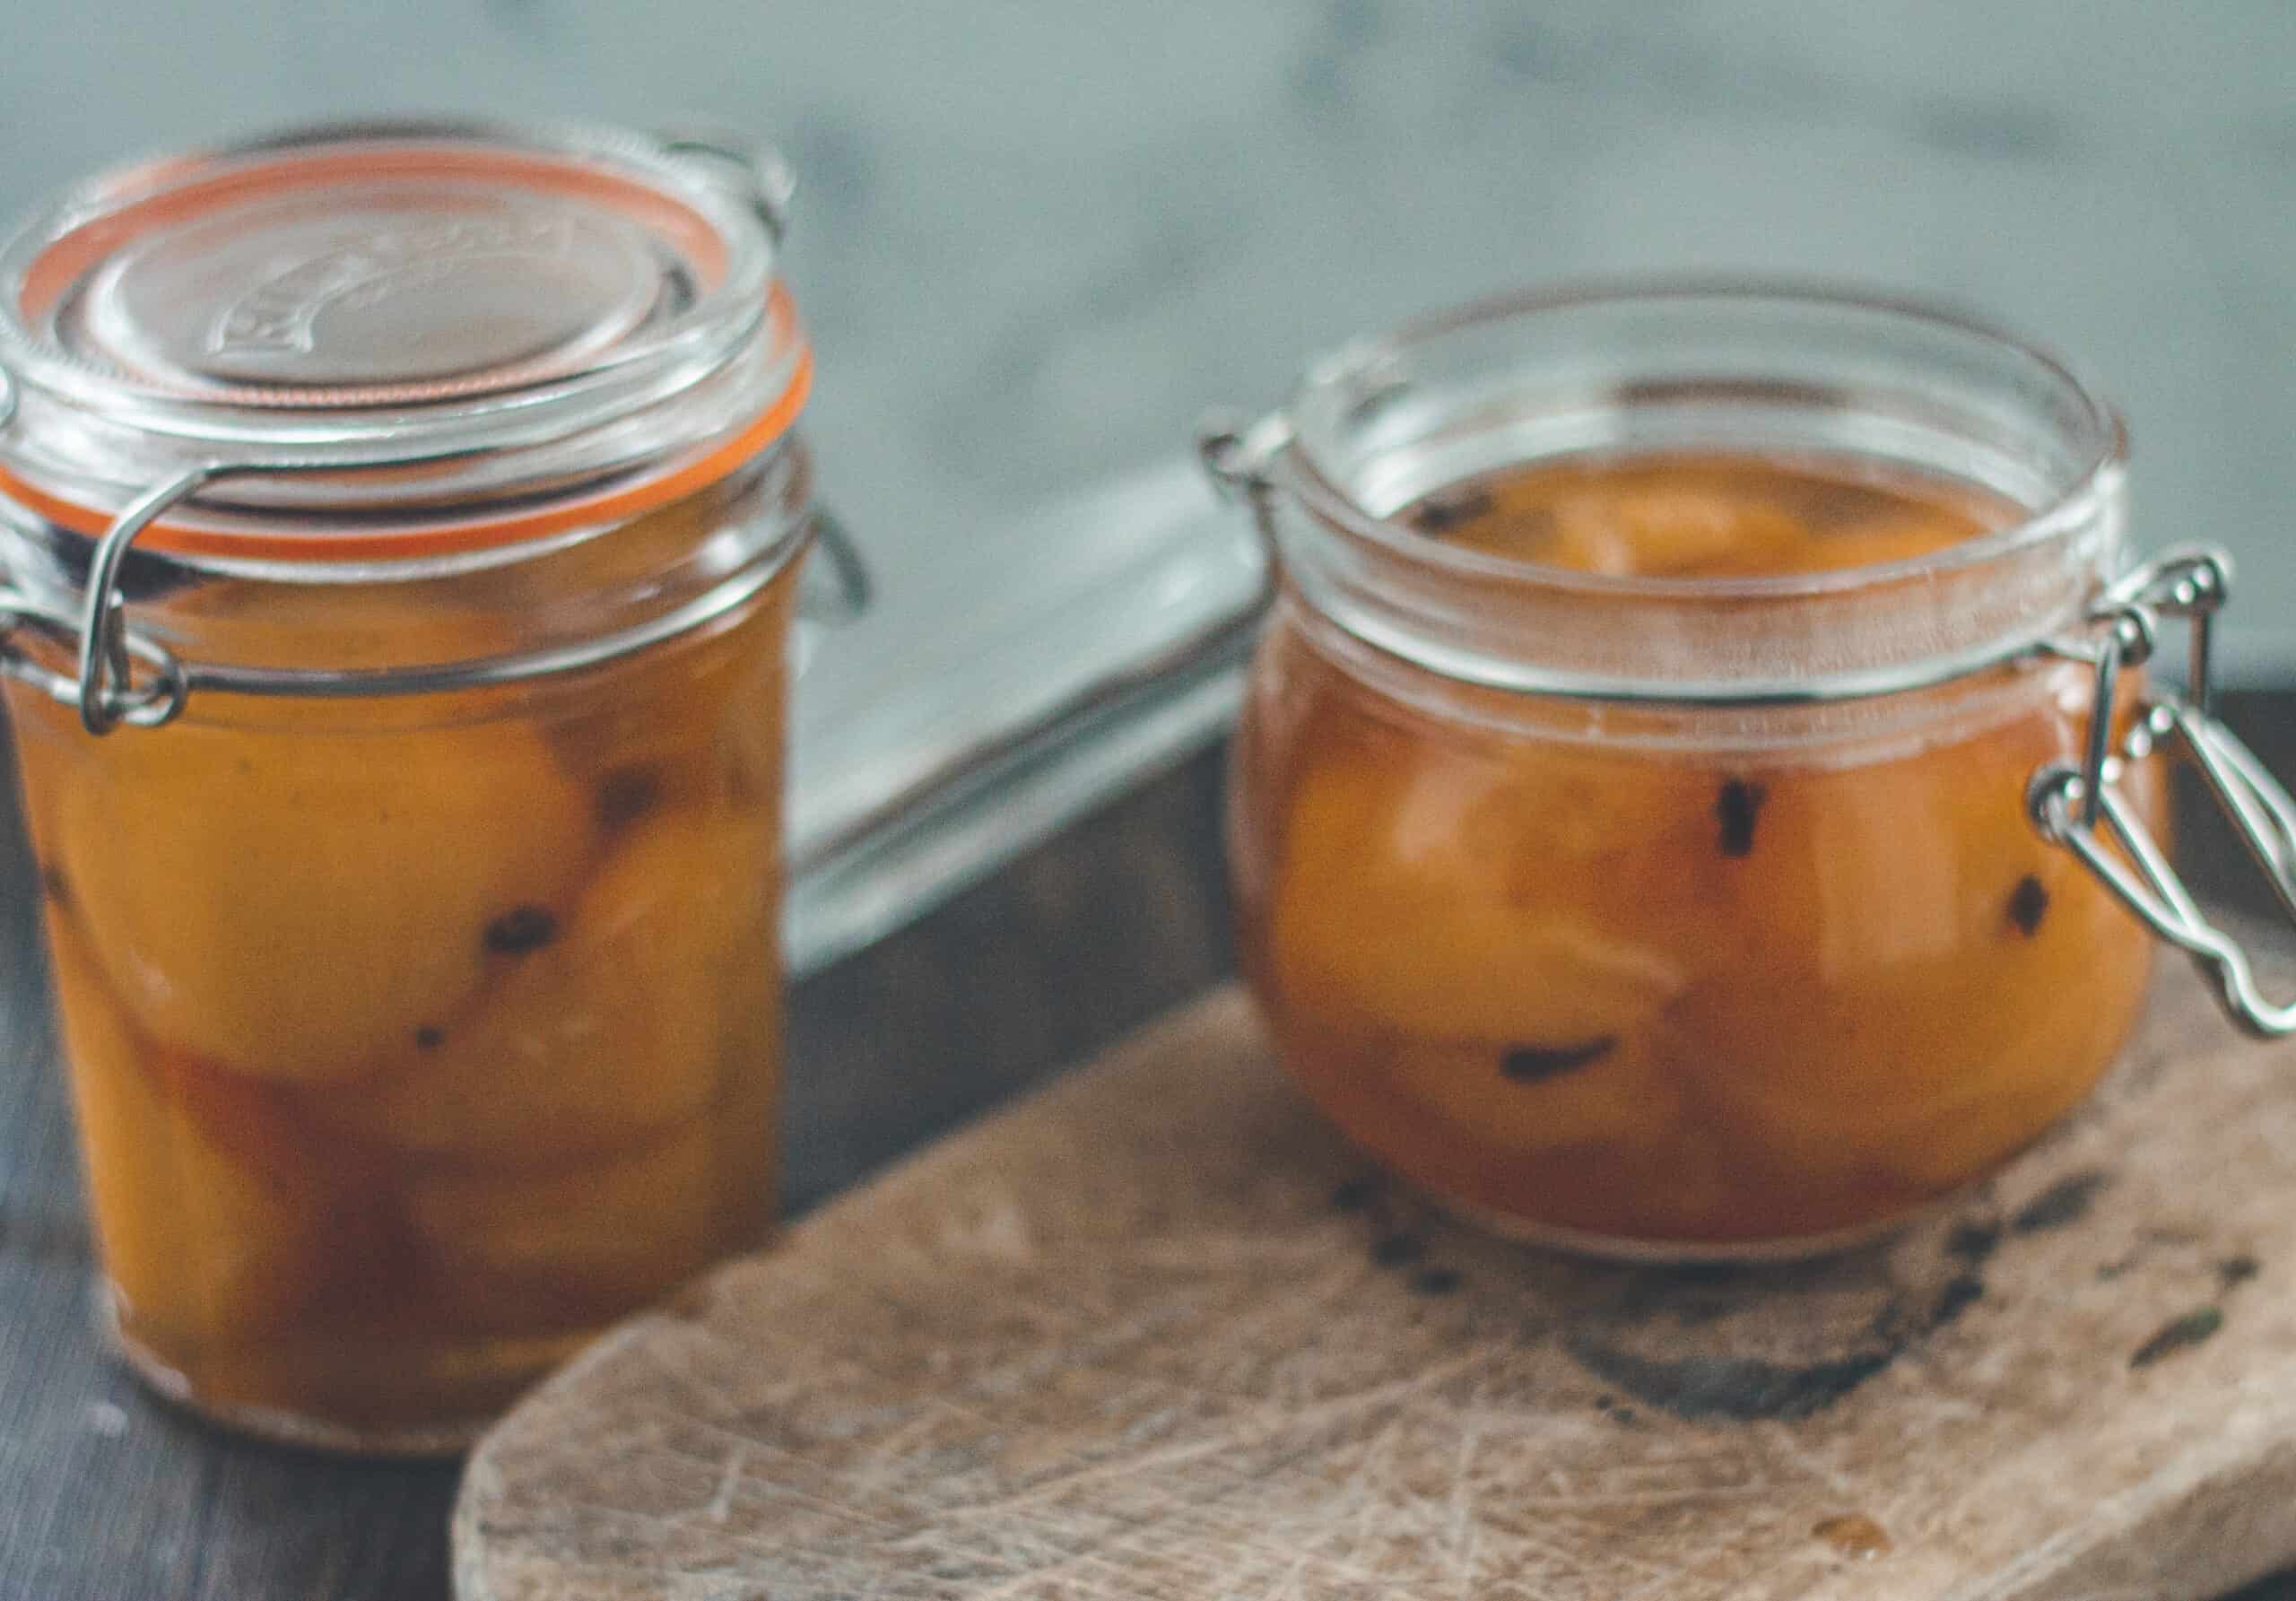 Jars of spiced peaches